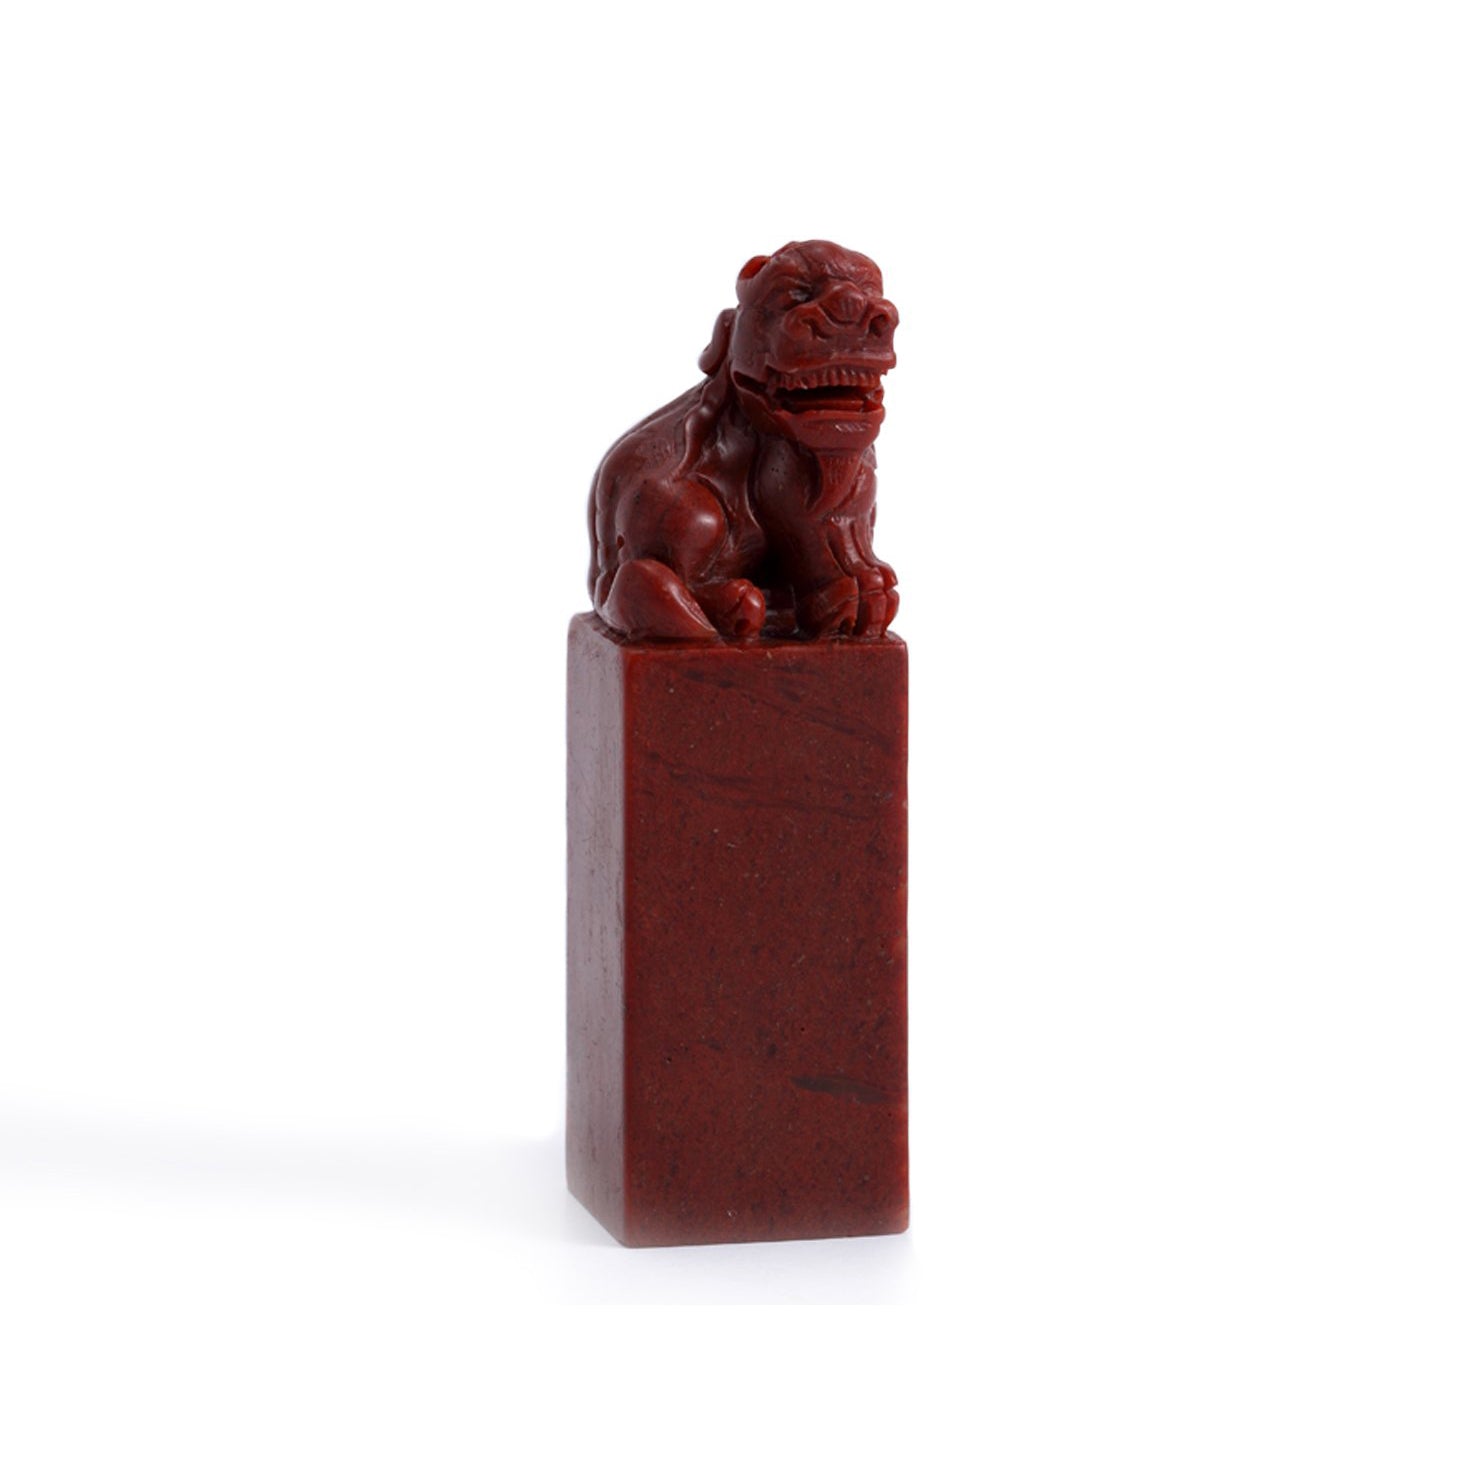 PIXIU HEAD MOUNTAIN RED - Collectors Seal Stone for Seal Carving